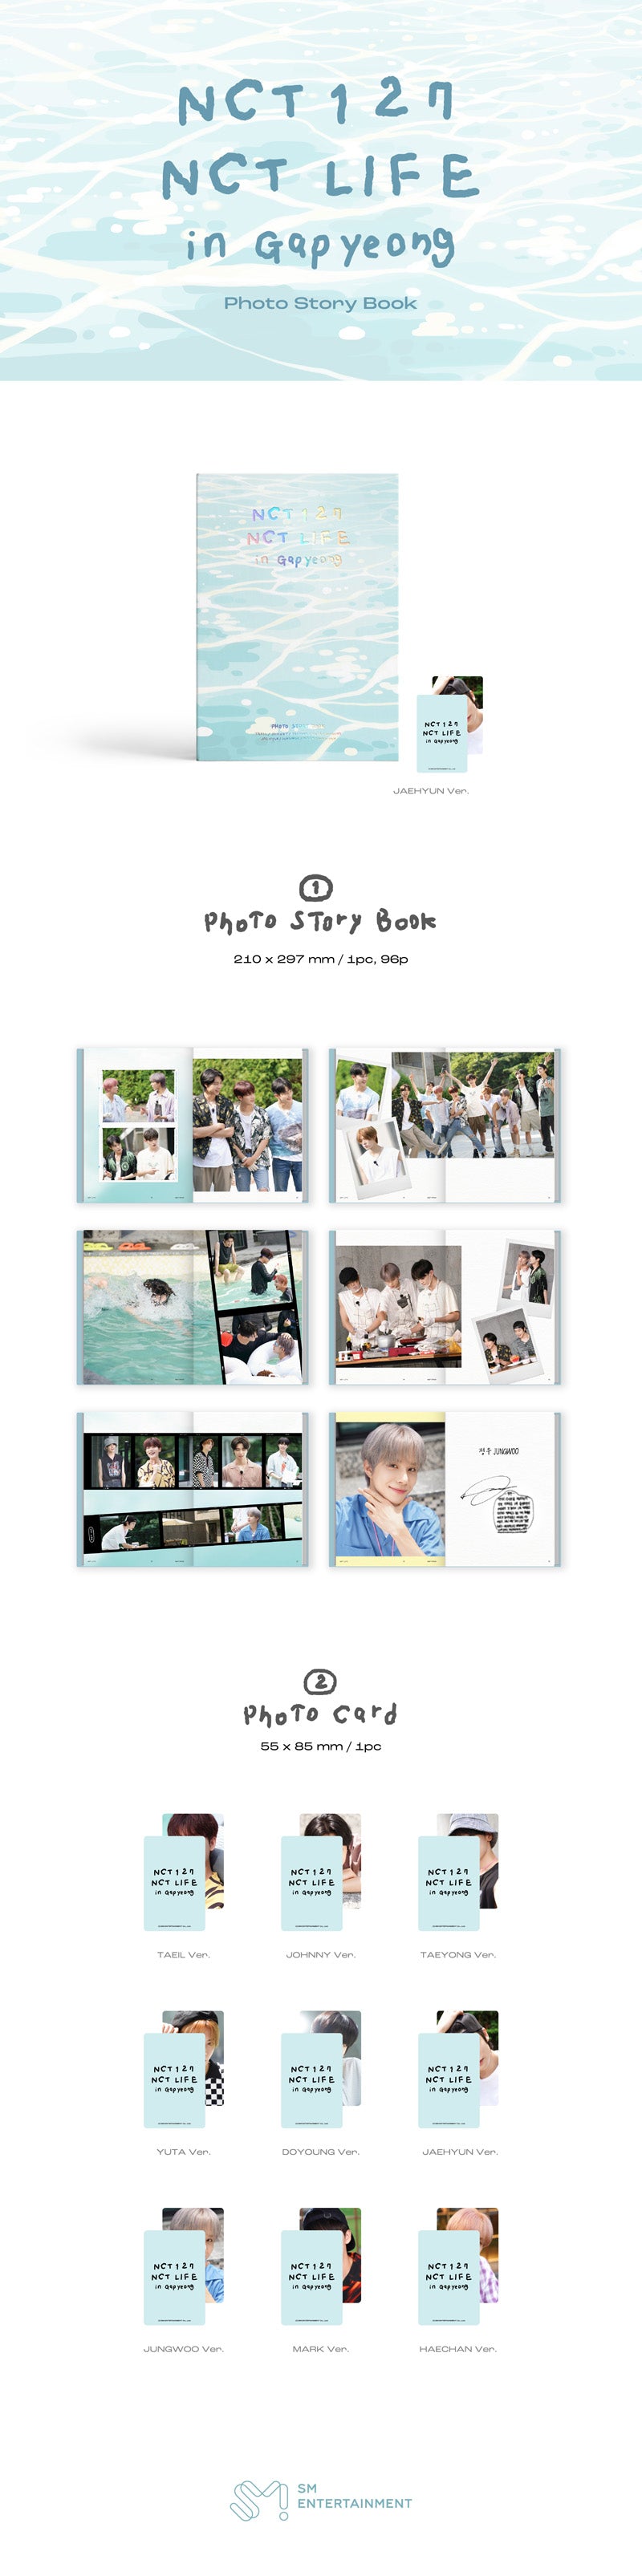 NCT 127 - NCT LIFE in Gapyeong [Photo Story Book]